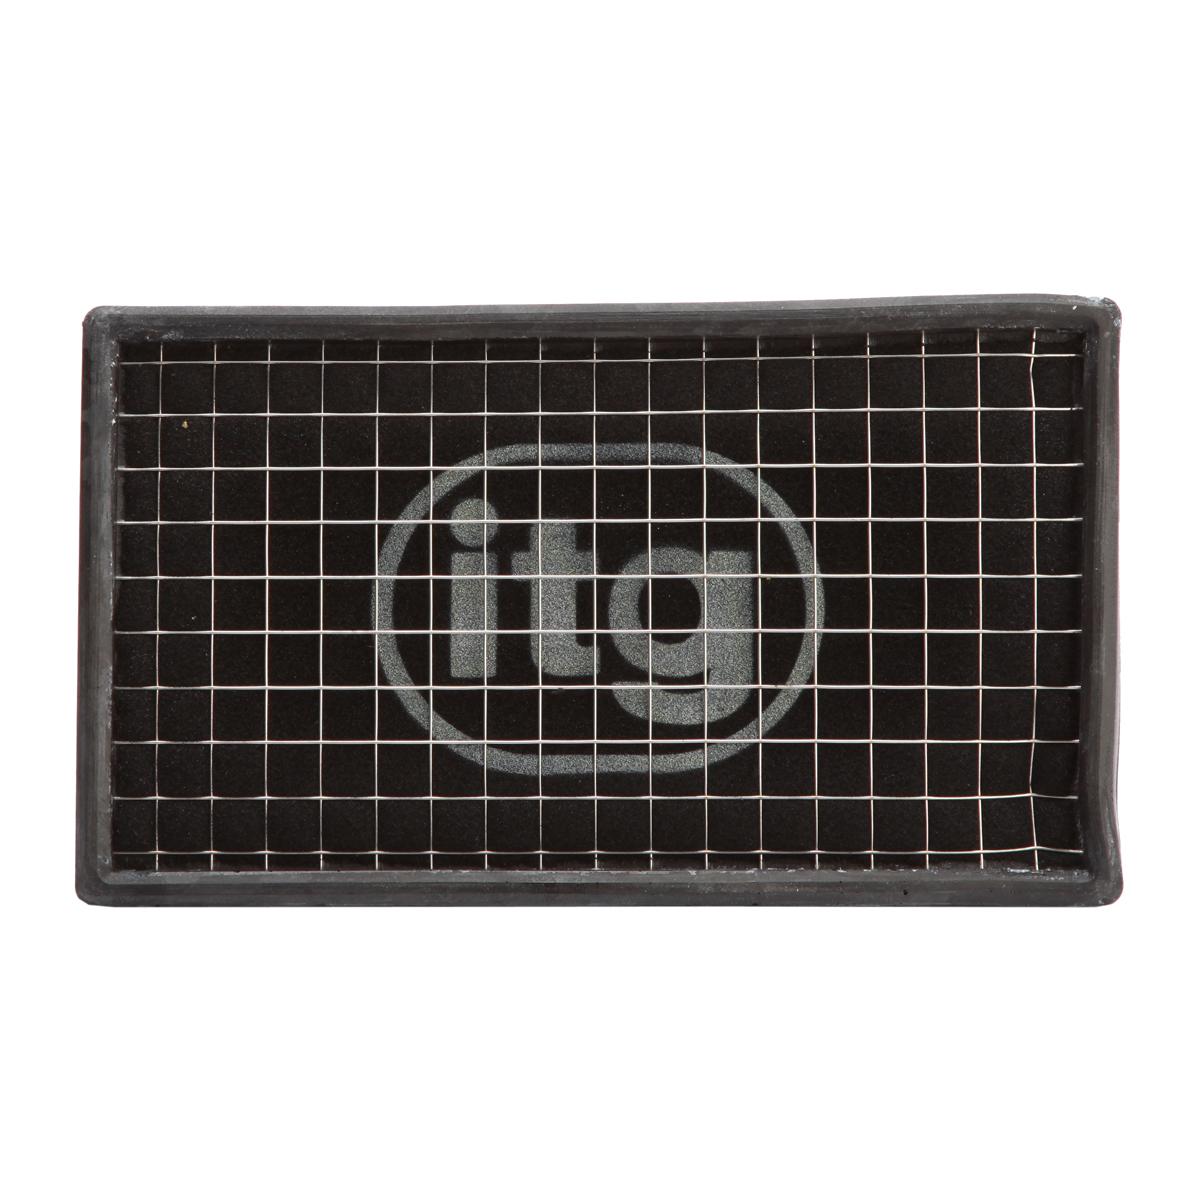 ITG Air Filter For BMW 316I E36 (03/91>08/95) (Compact)